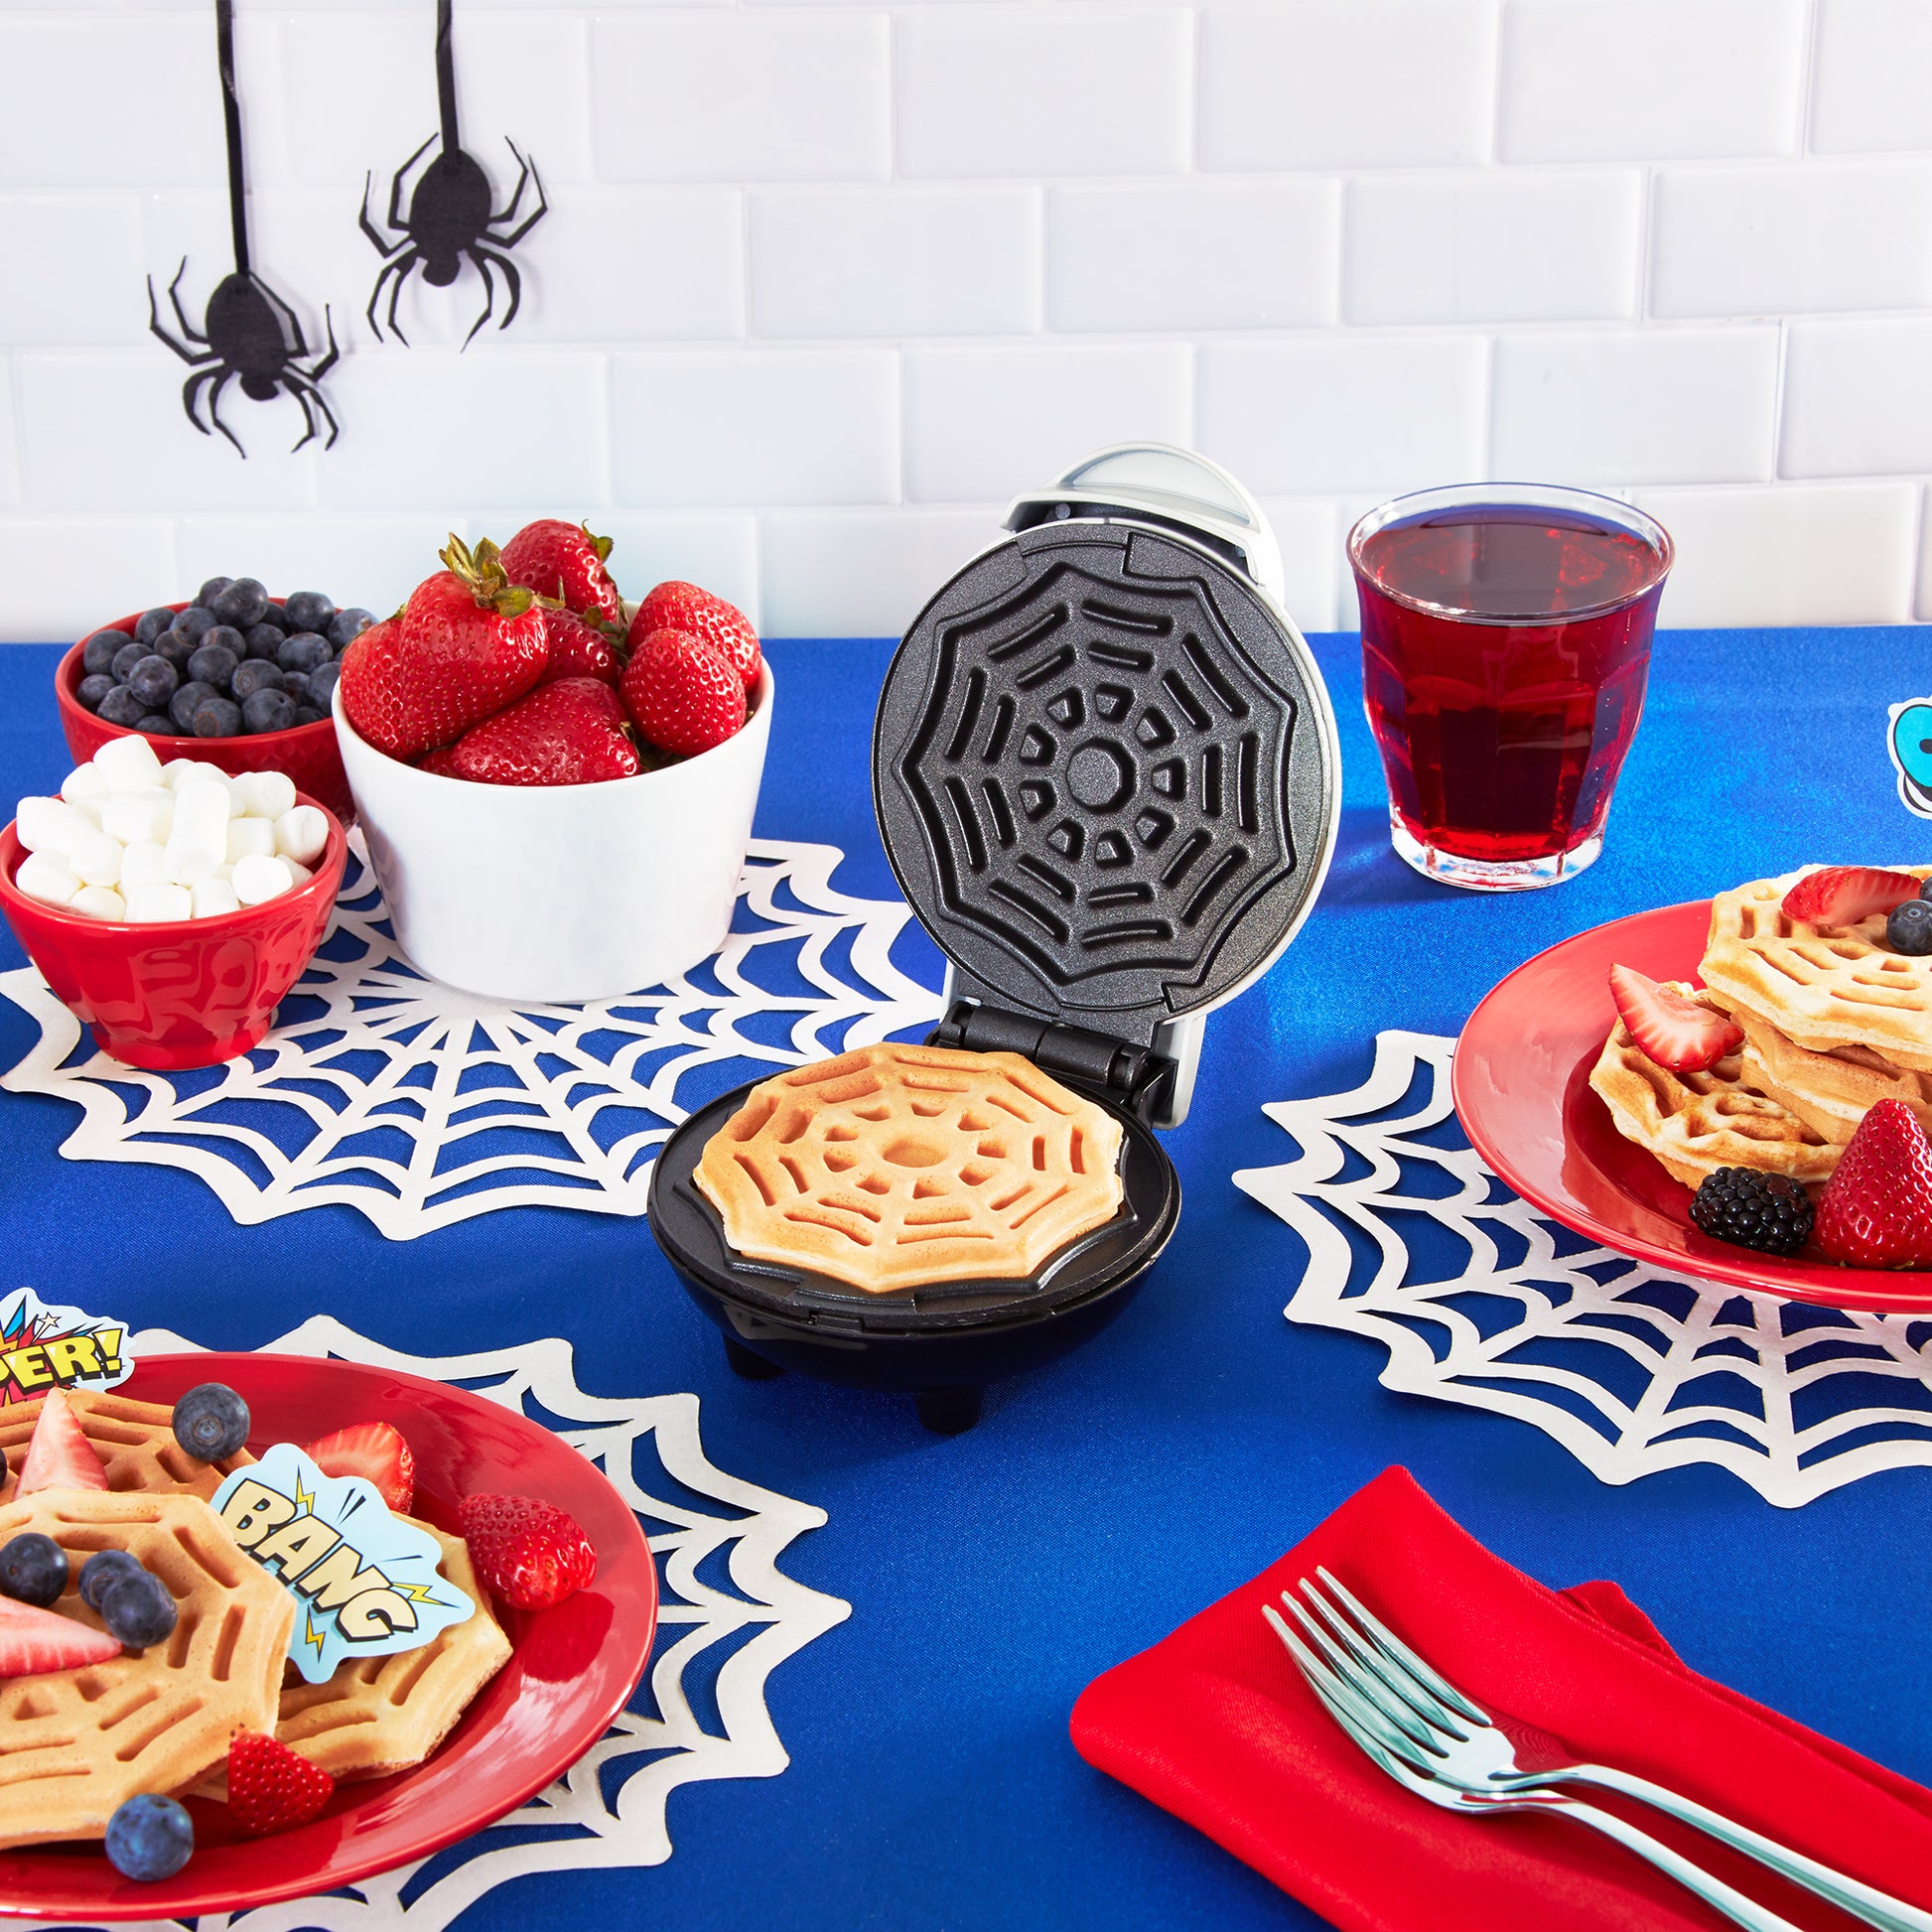 Marvel Red and Blue Spider-Man Mini American Waffle Maker